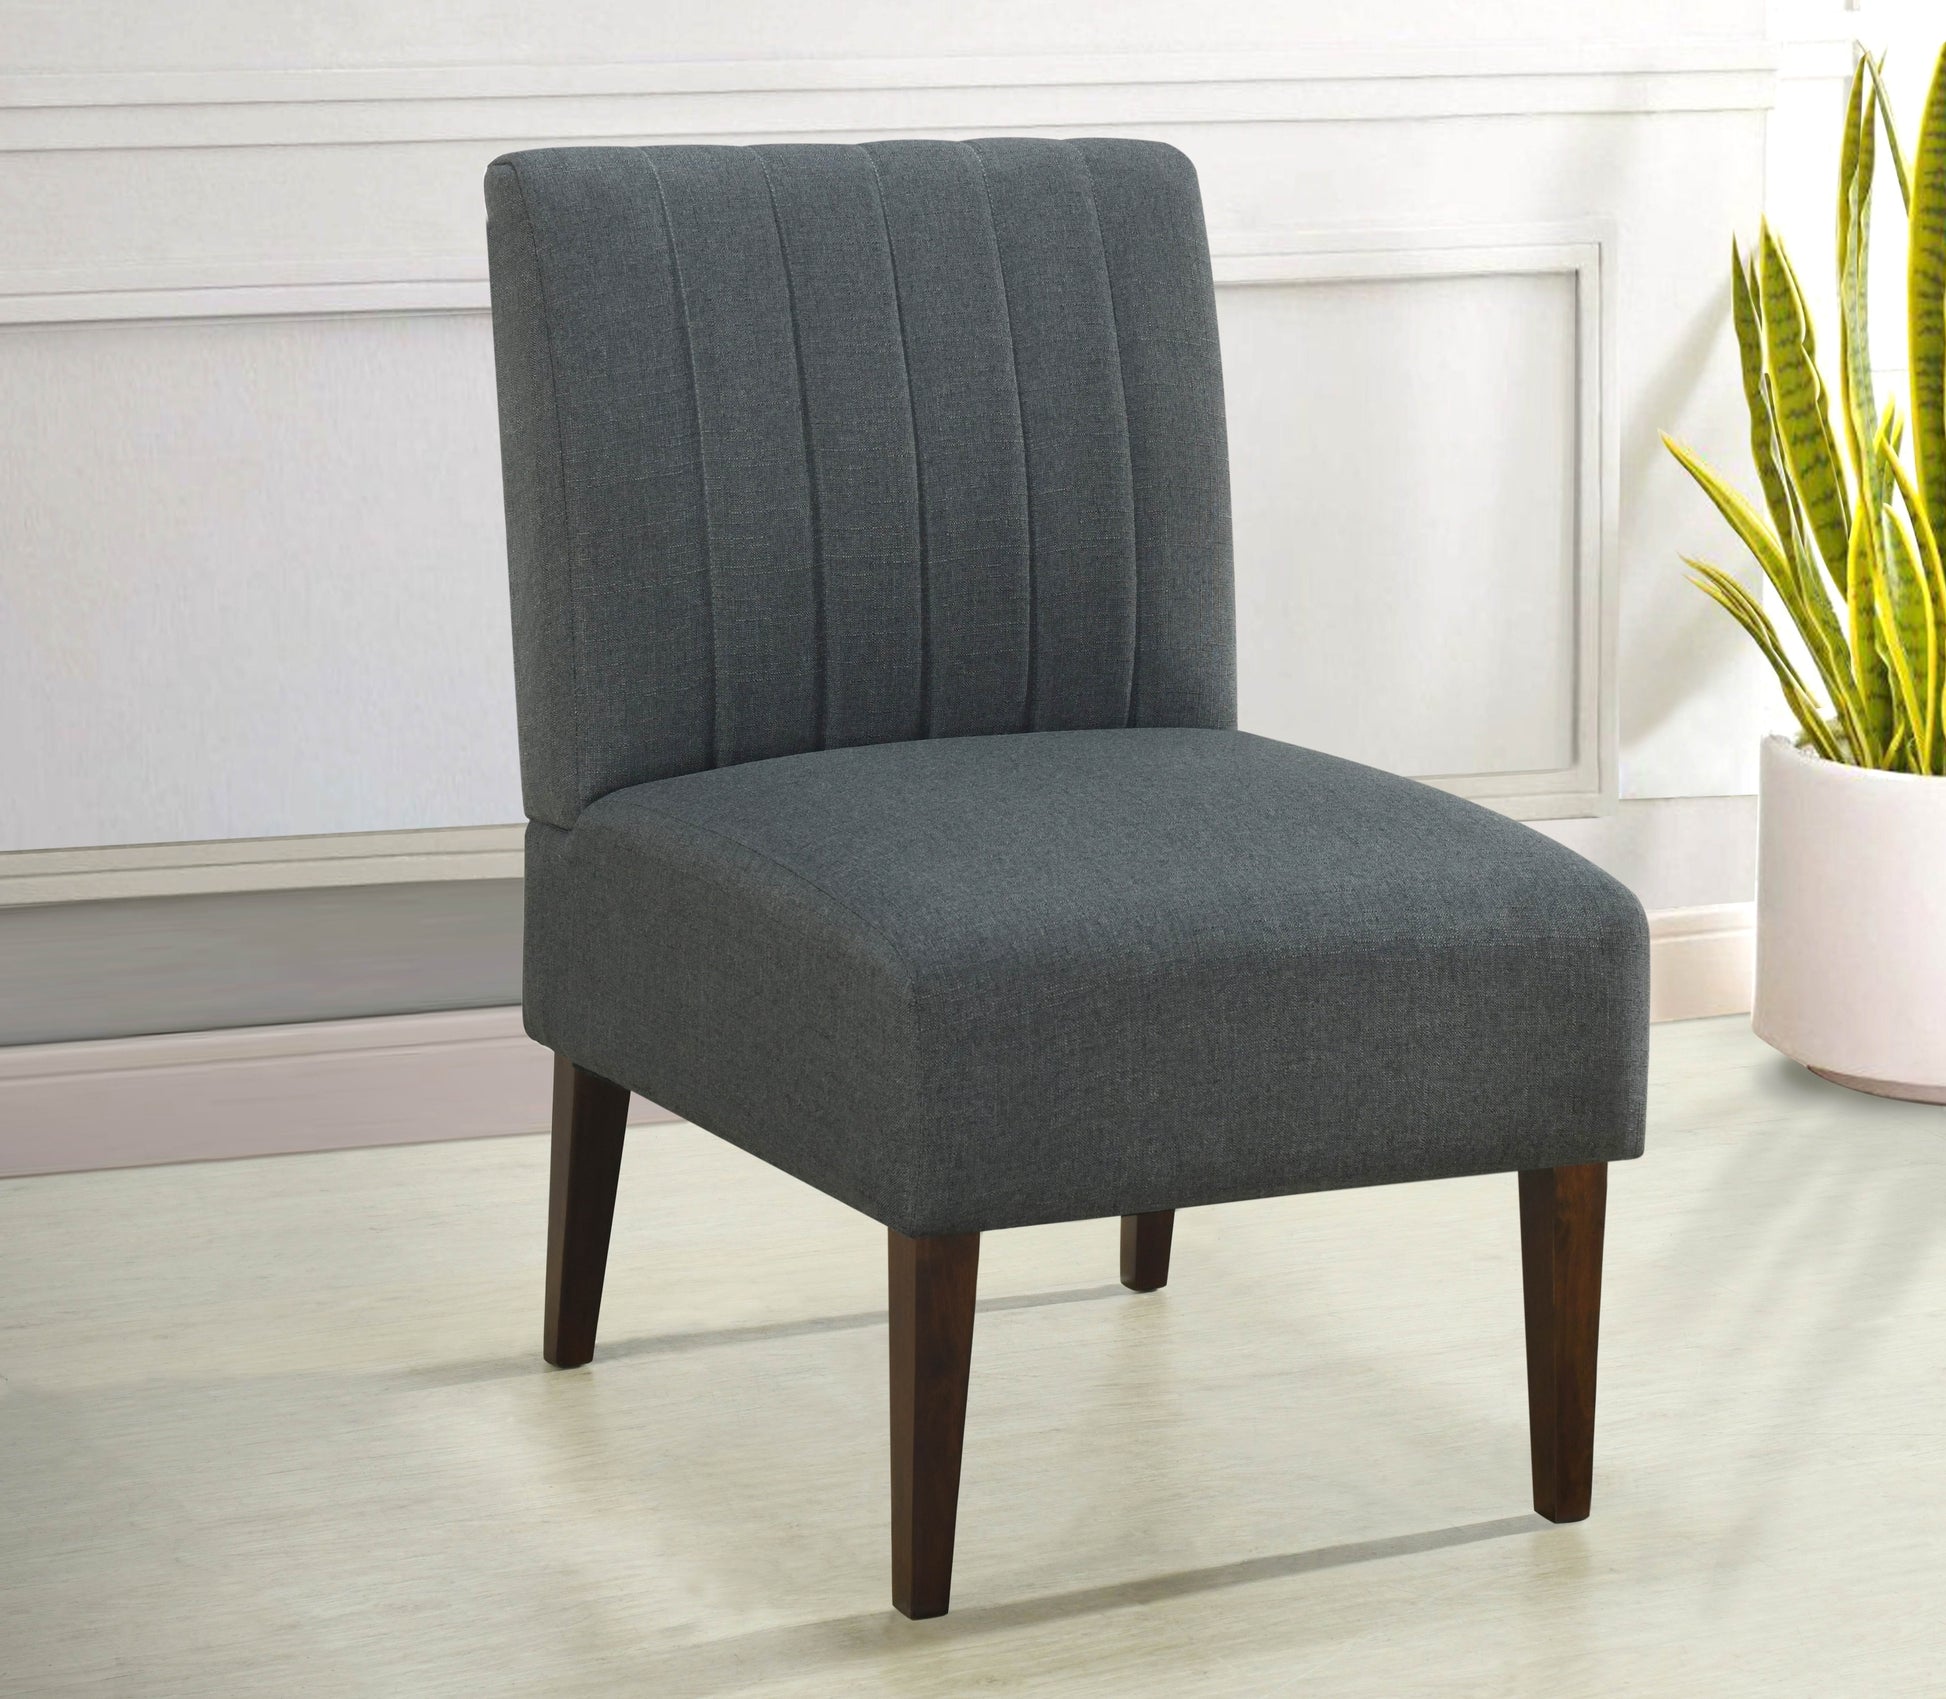 Stylish Comfortable Accent Chair 1pc Dark Gray Fabric dark gray-primary living space-wood